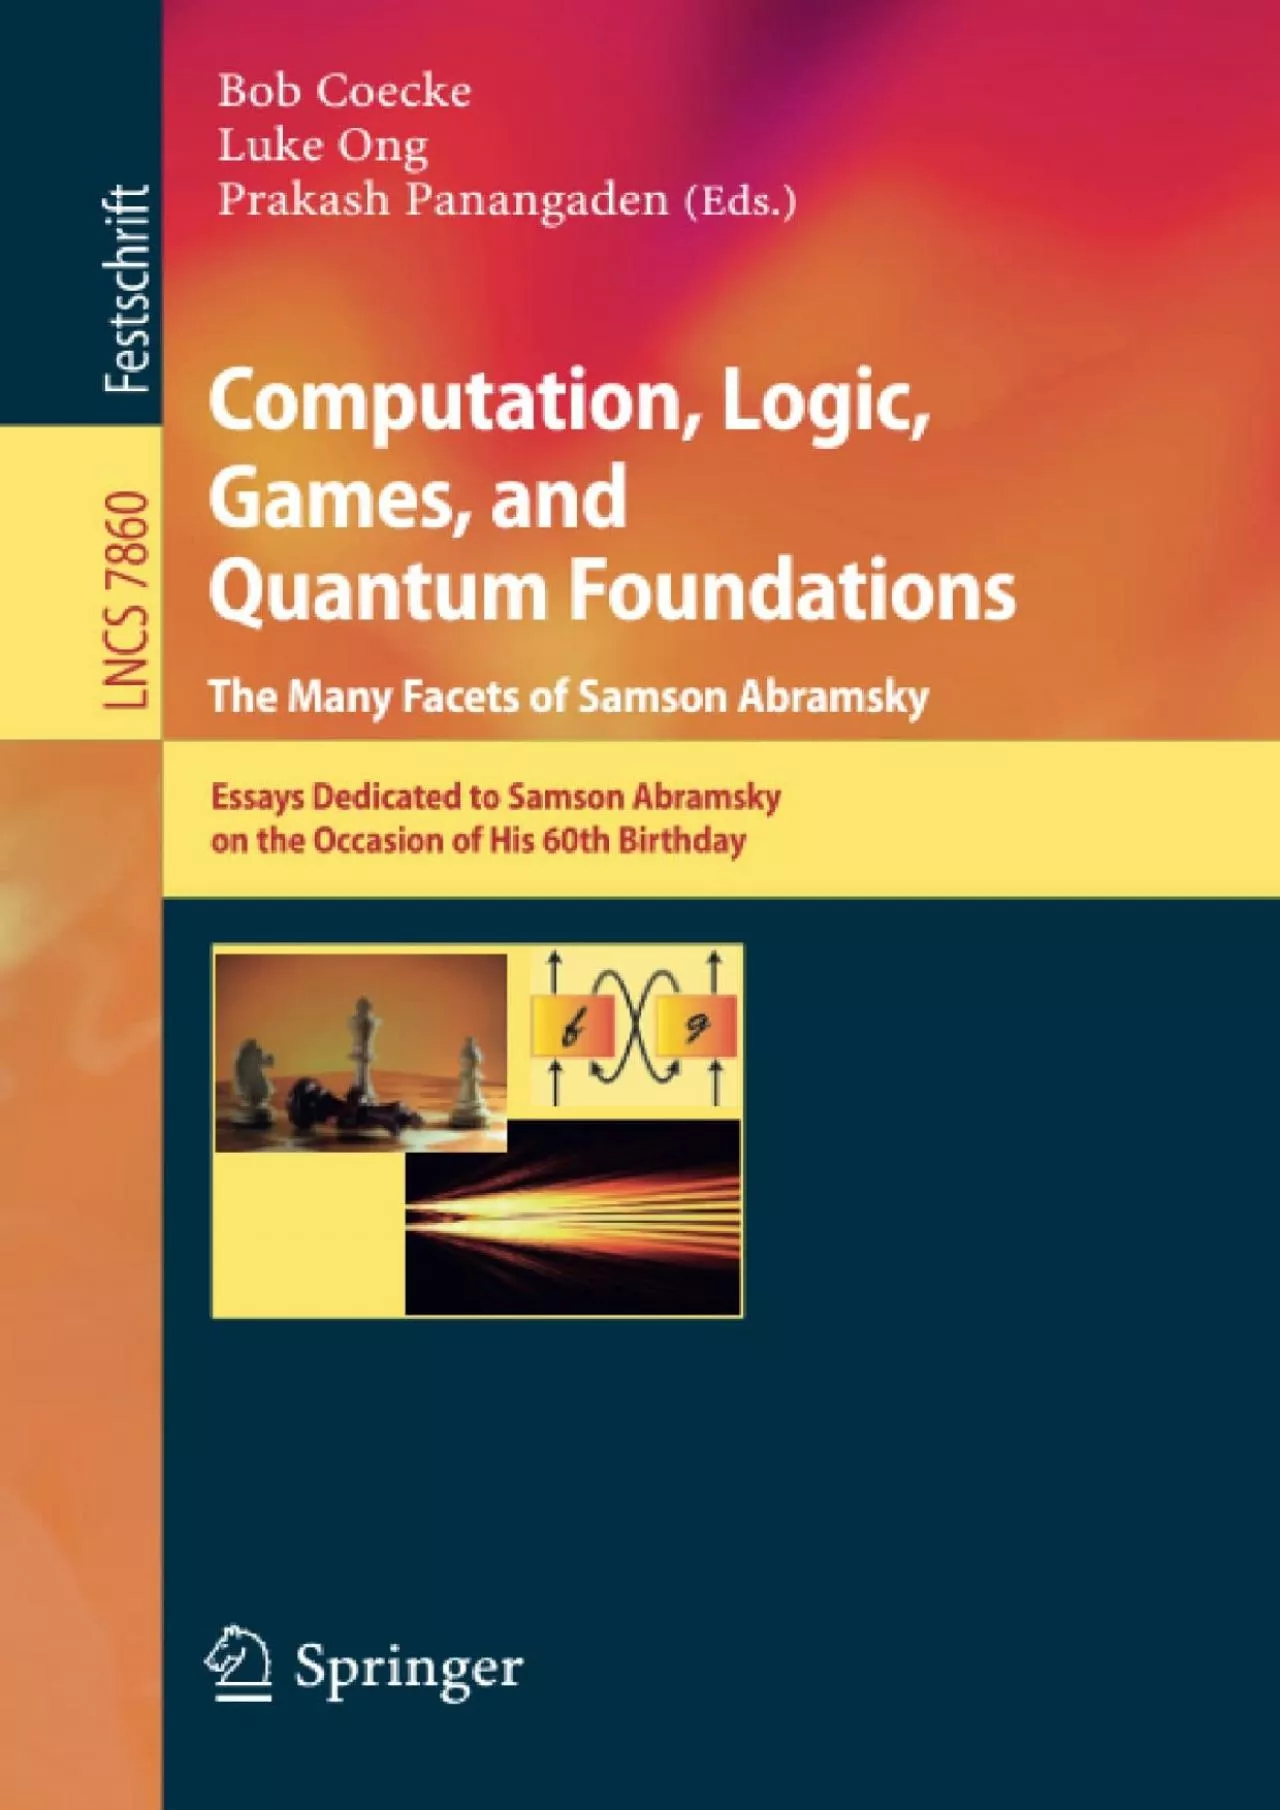 [READ]-Computation, Logic, Games, and Quantum Foundations - The Many Facets of Samson